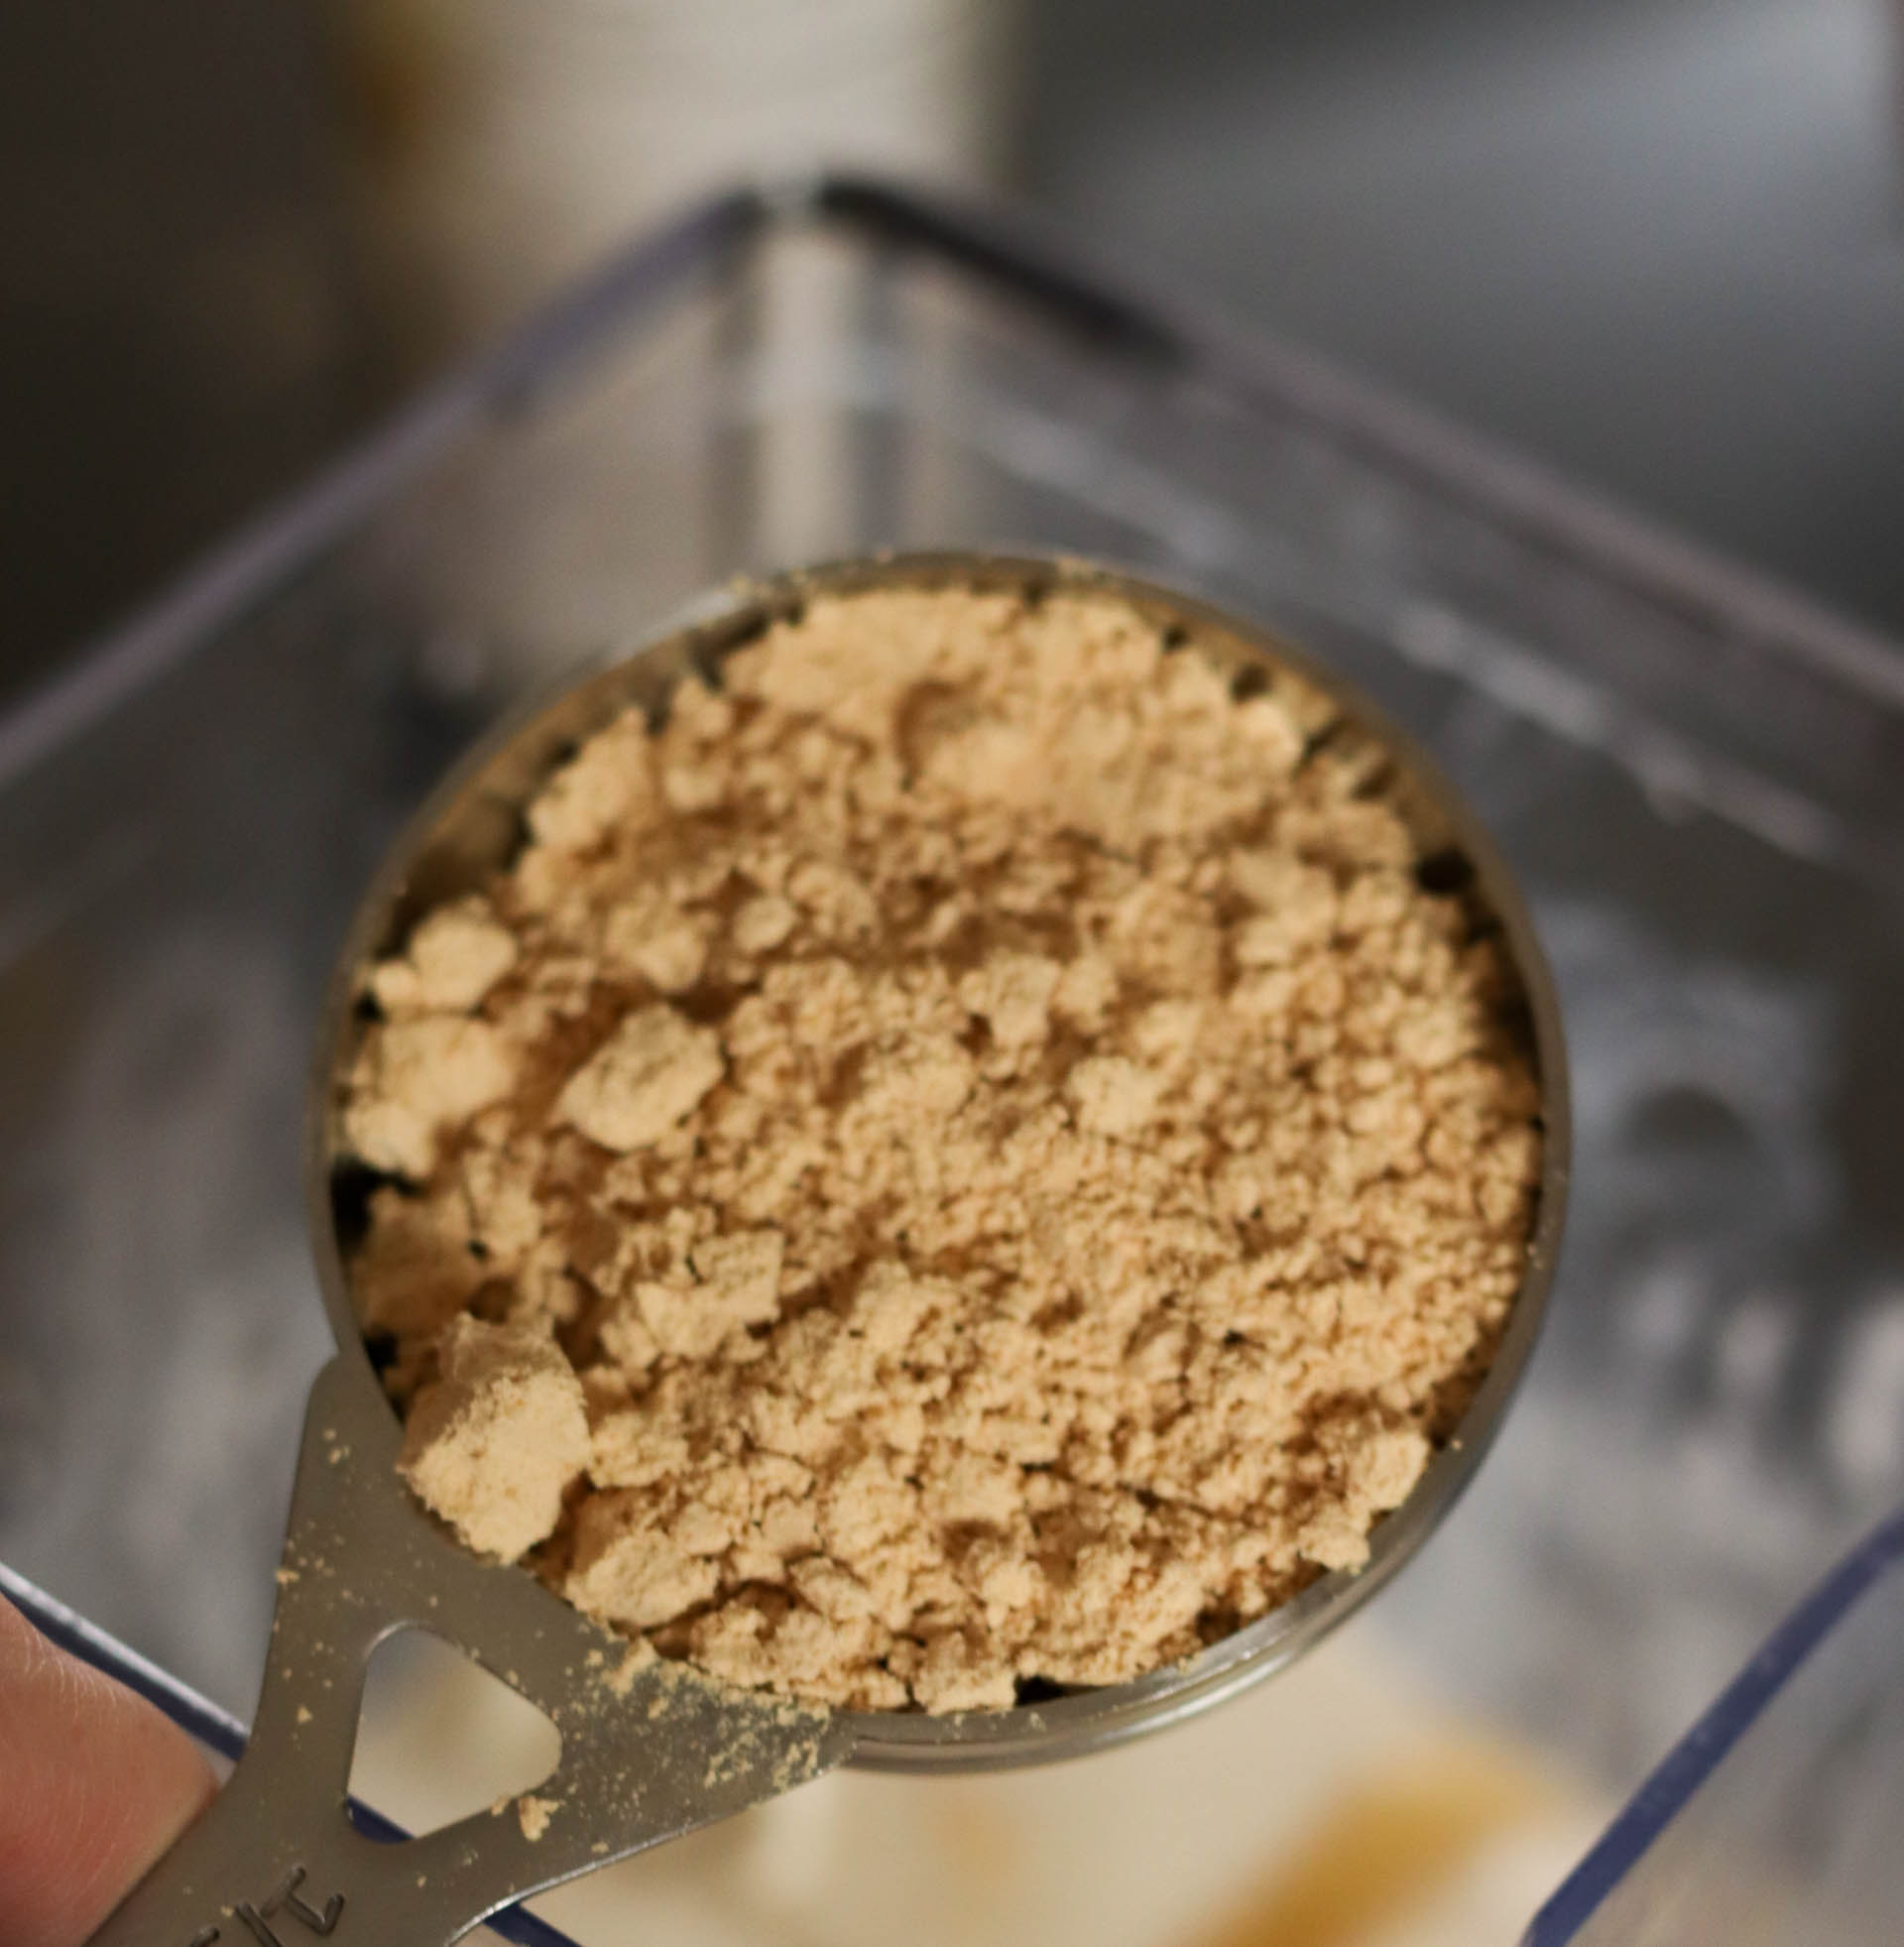 1/4 cup of powdered peanut butter in a measuring cup